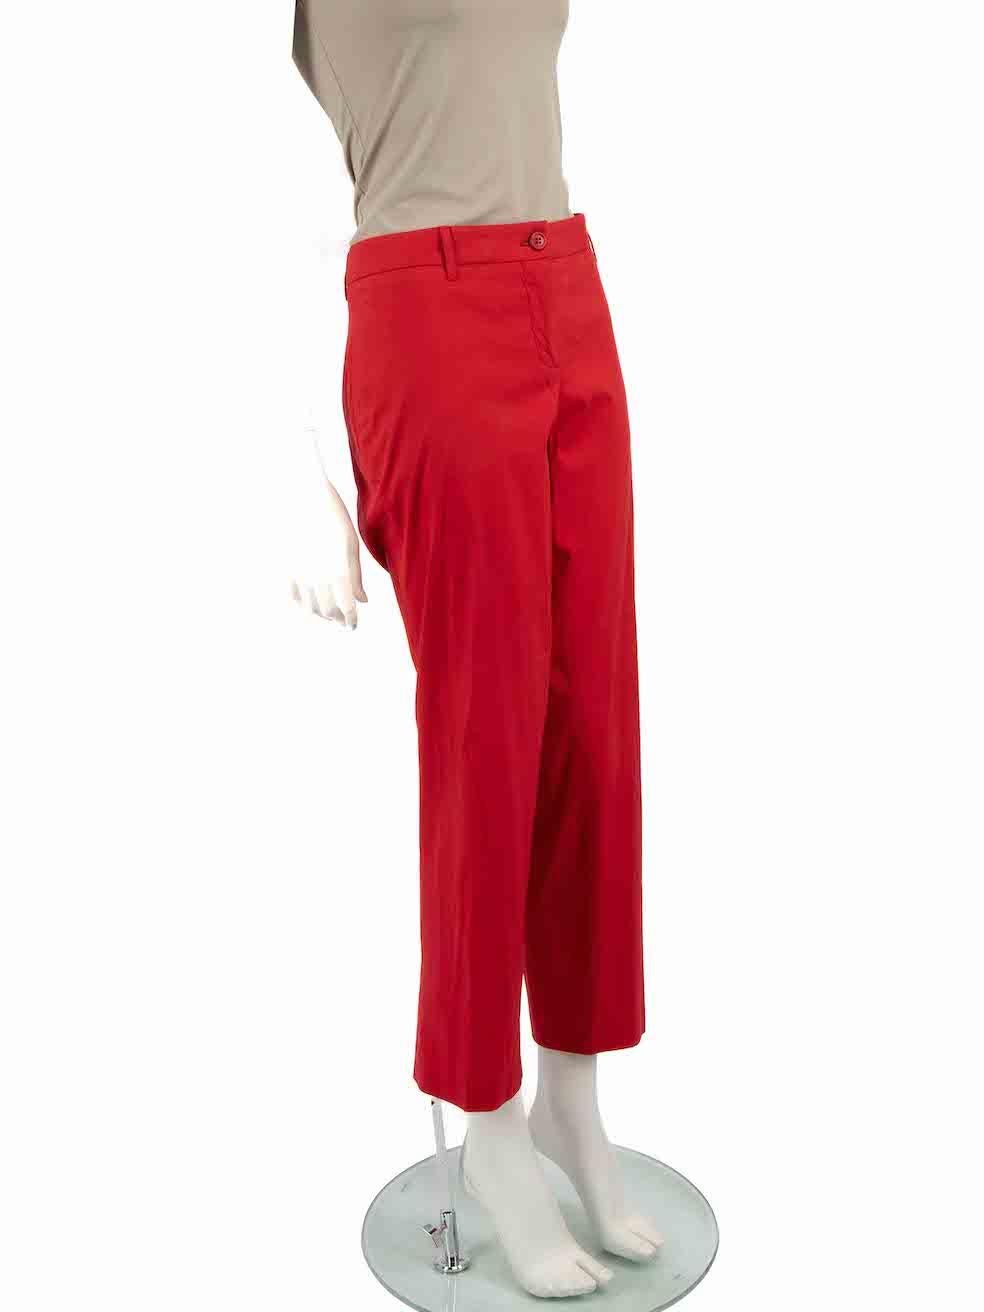 CONDITION is Very good. Minimal wear to trousers is evident. Minimal wear to the left leg with a small hole at the side seam and there is a mark to the front on this used Miu Miu designer resale item.
 
 Details
 Red
 Cotton
 Trousers
 Slim fit
 Mid